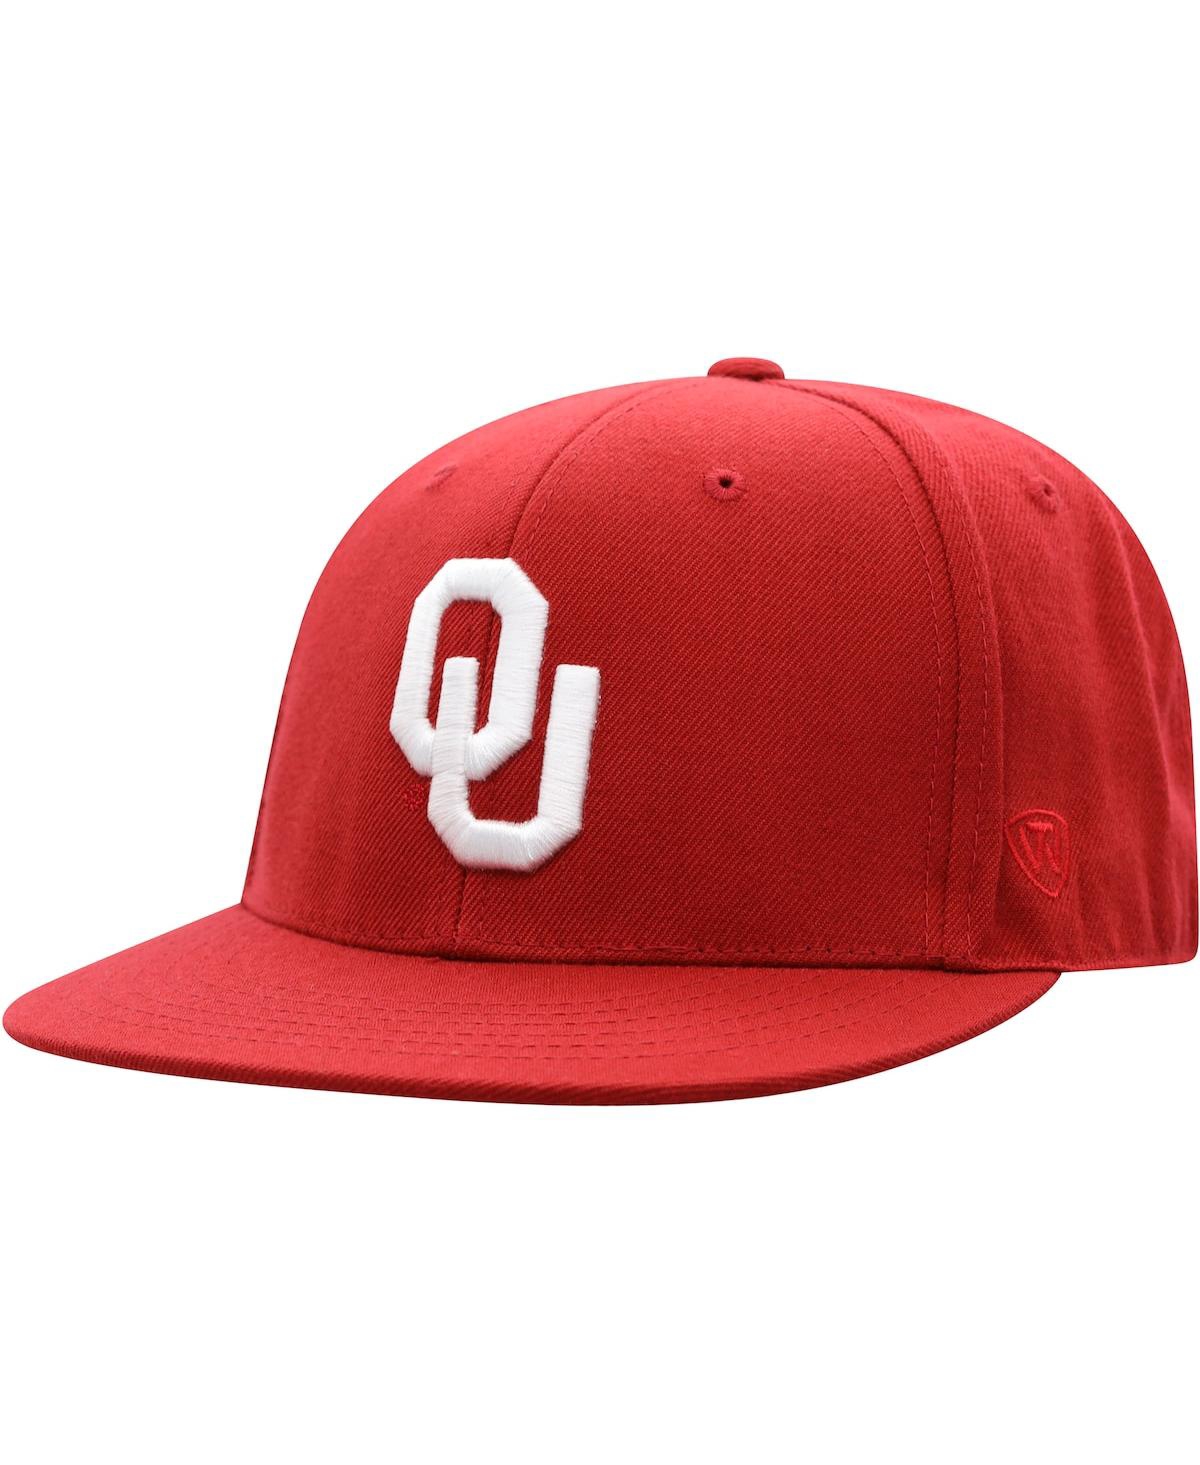 Men's Top of the World Crimson Oklahoma Sooners Team Color Fitted Hat - Crimson